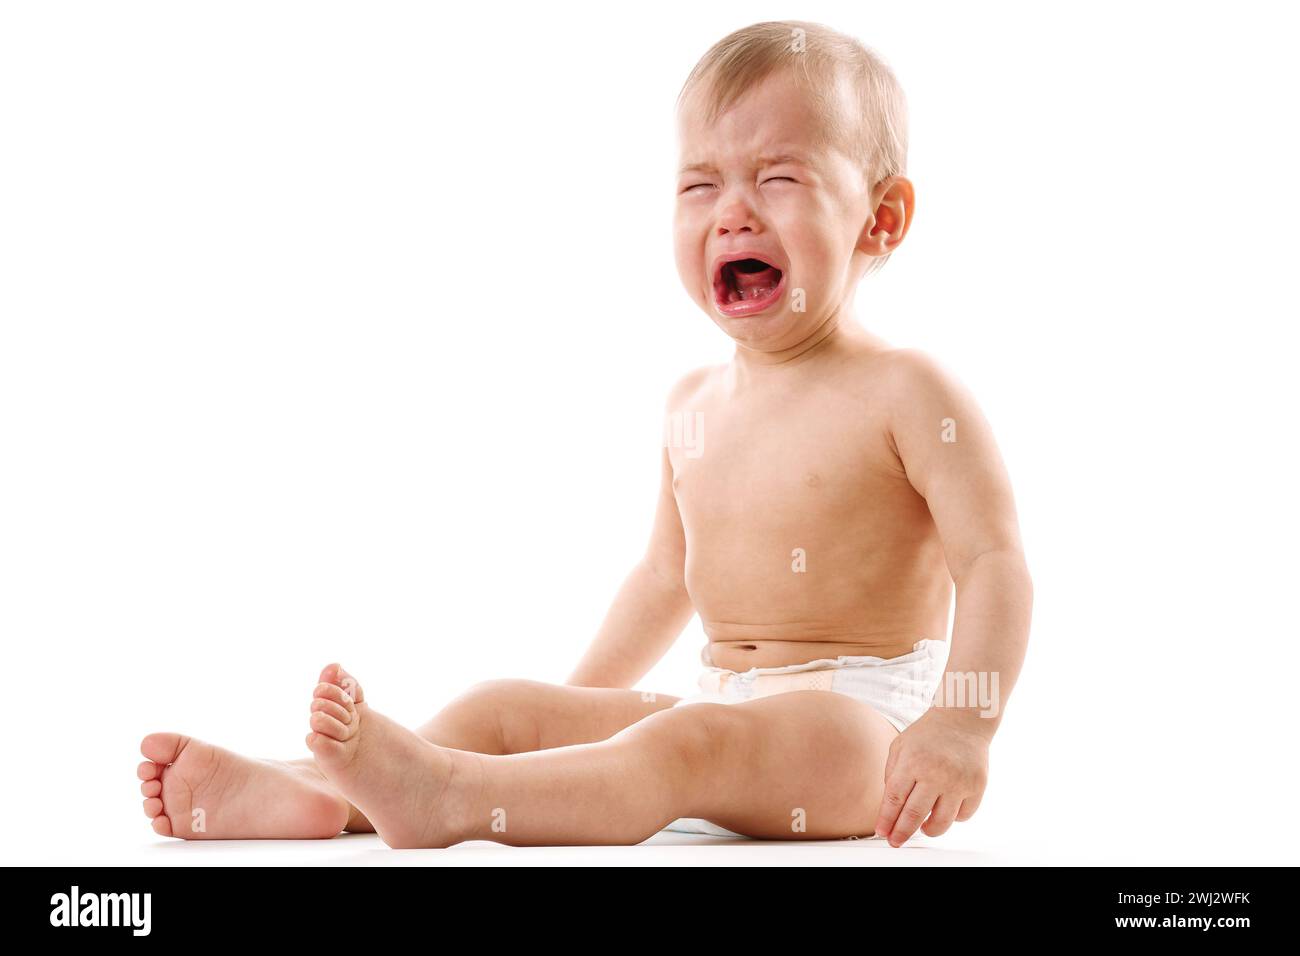 Upset little boy in diaper sitting and crying. Stock Photo